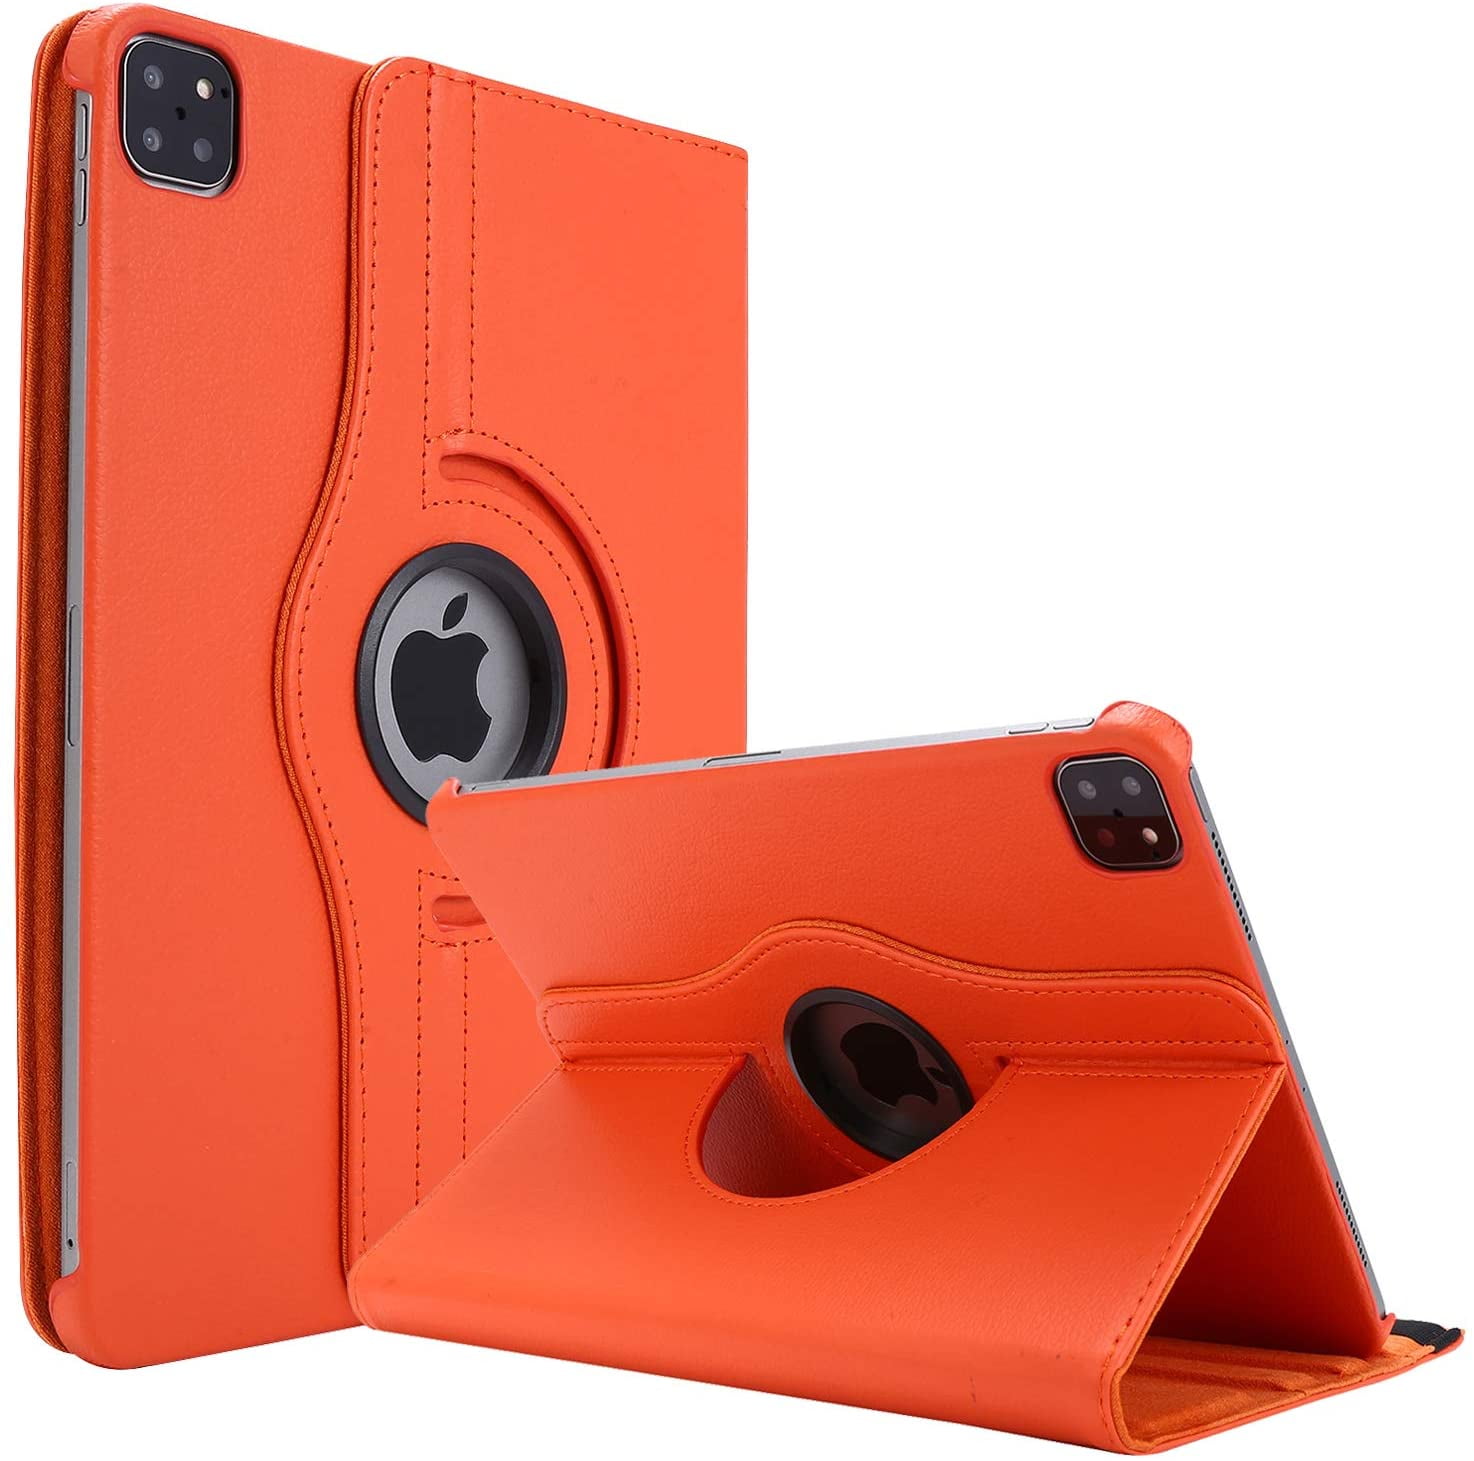 LEATHER 360 DEGREE ROTATING CASE COVER FOR I PAD PRO 9.7" IN VARIOUS COLORS 